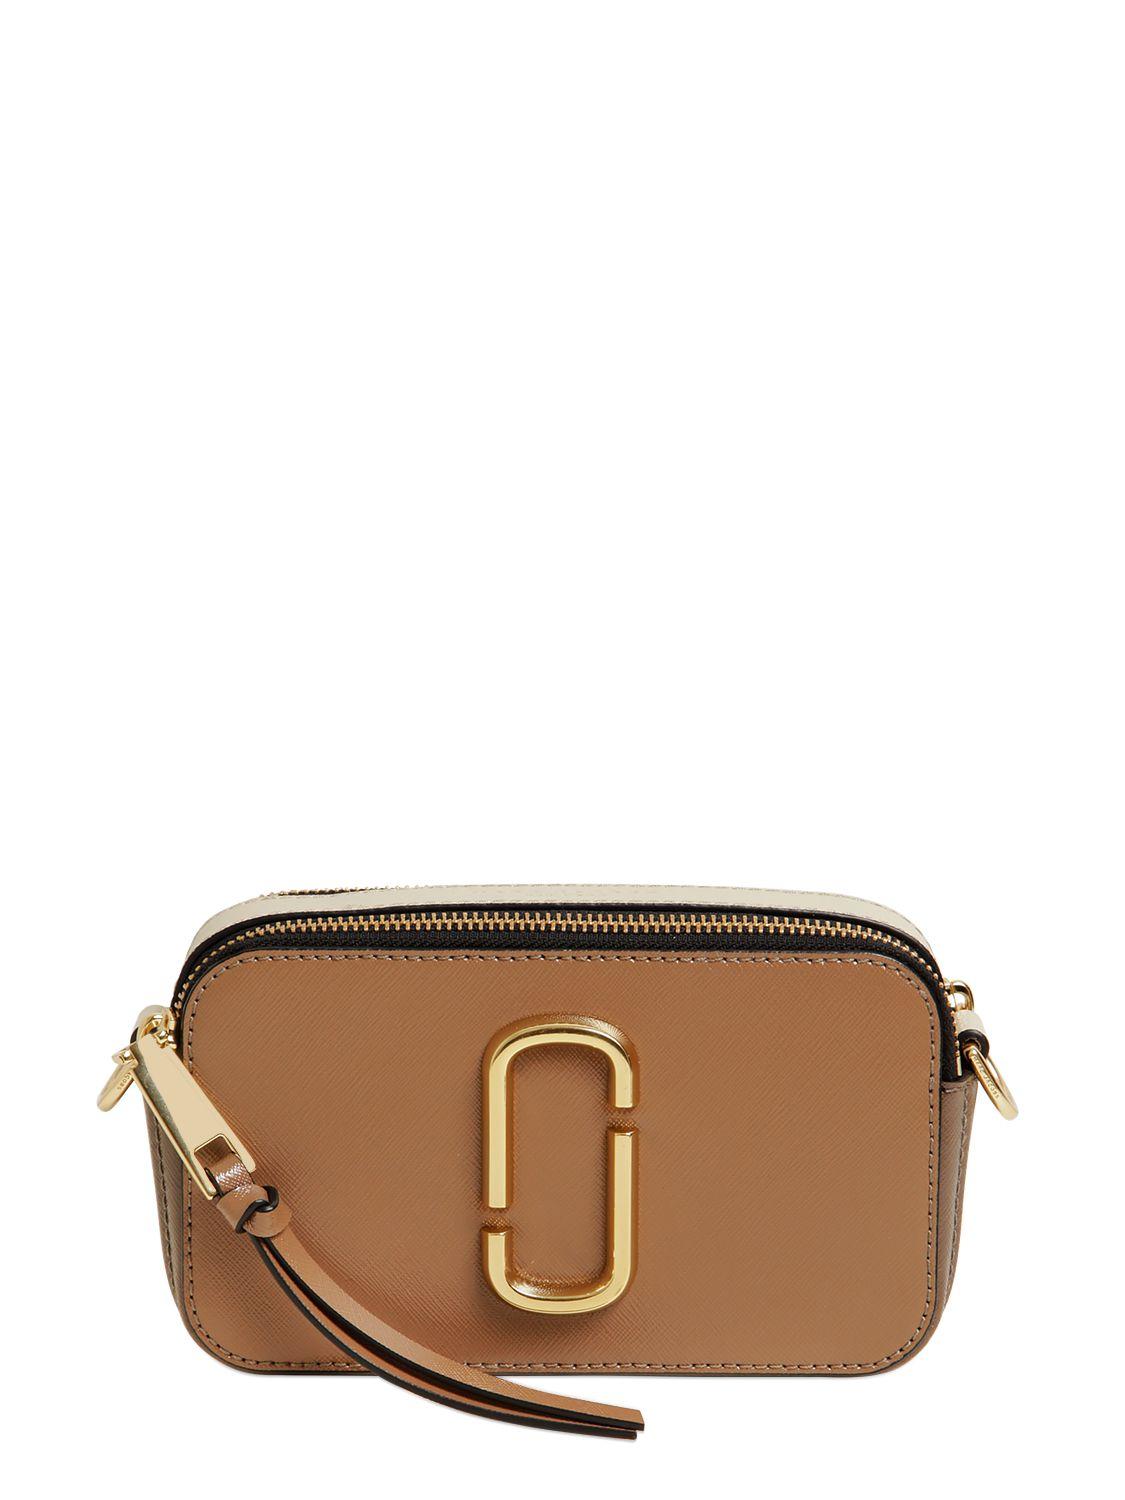 Marc Jacobs Snapshot Color Block Leather Bag in Taupe (Brown) - Lyst